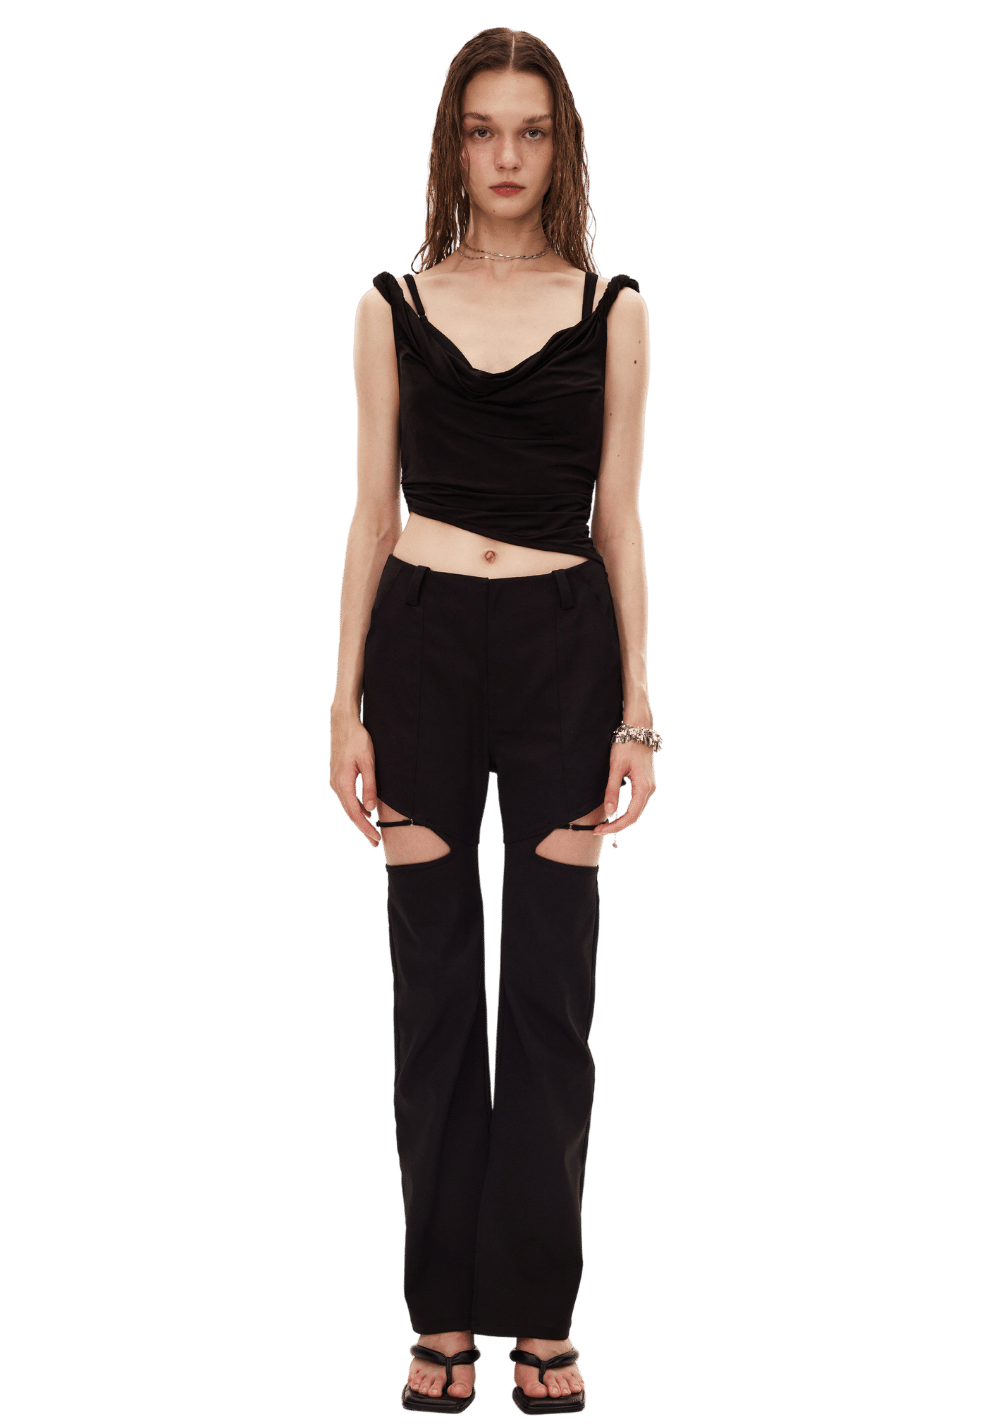 Acetate Two Piece Camisole - PSYLOS 1, Acetate Two Piece Camisole, T-Shirt, LEEWEI, PSYLOS 1